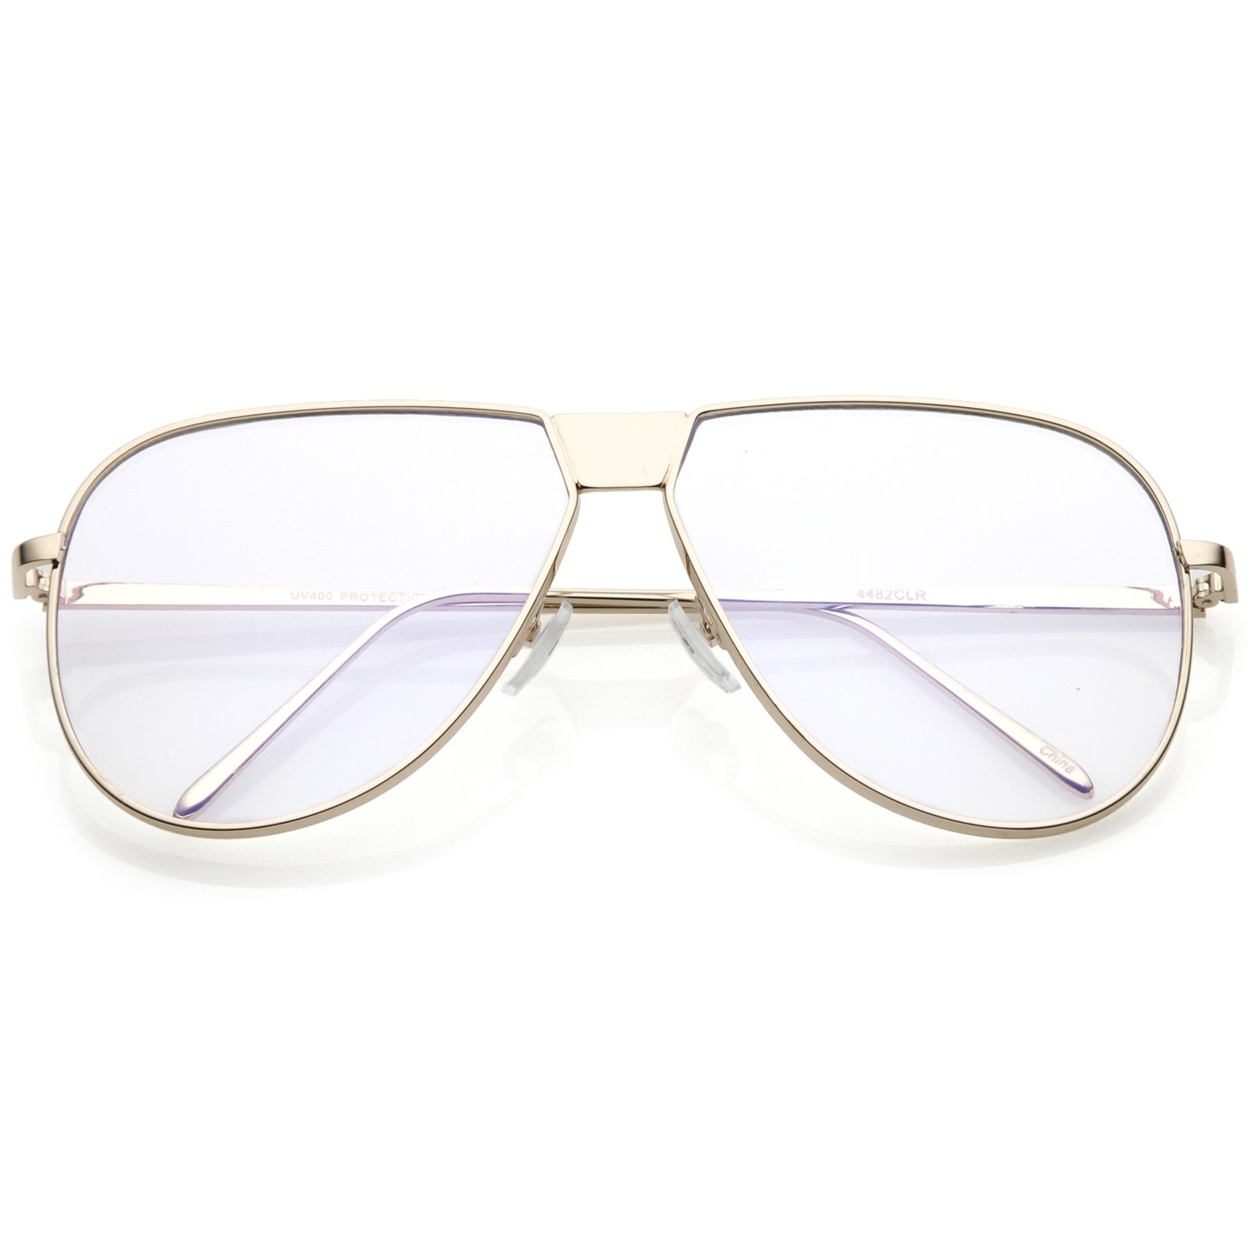 Oversize Full Metal Flat Top Aviator Glasses Clear Flat Lens 60mm - Gold / Clear